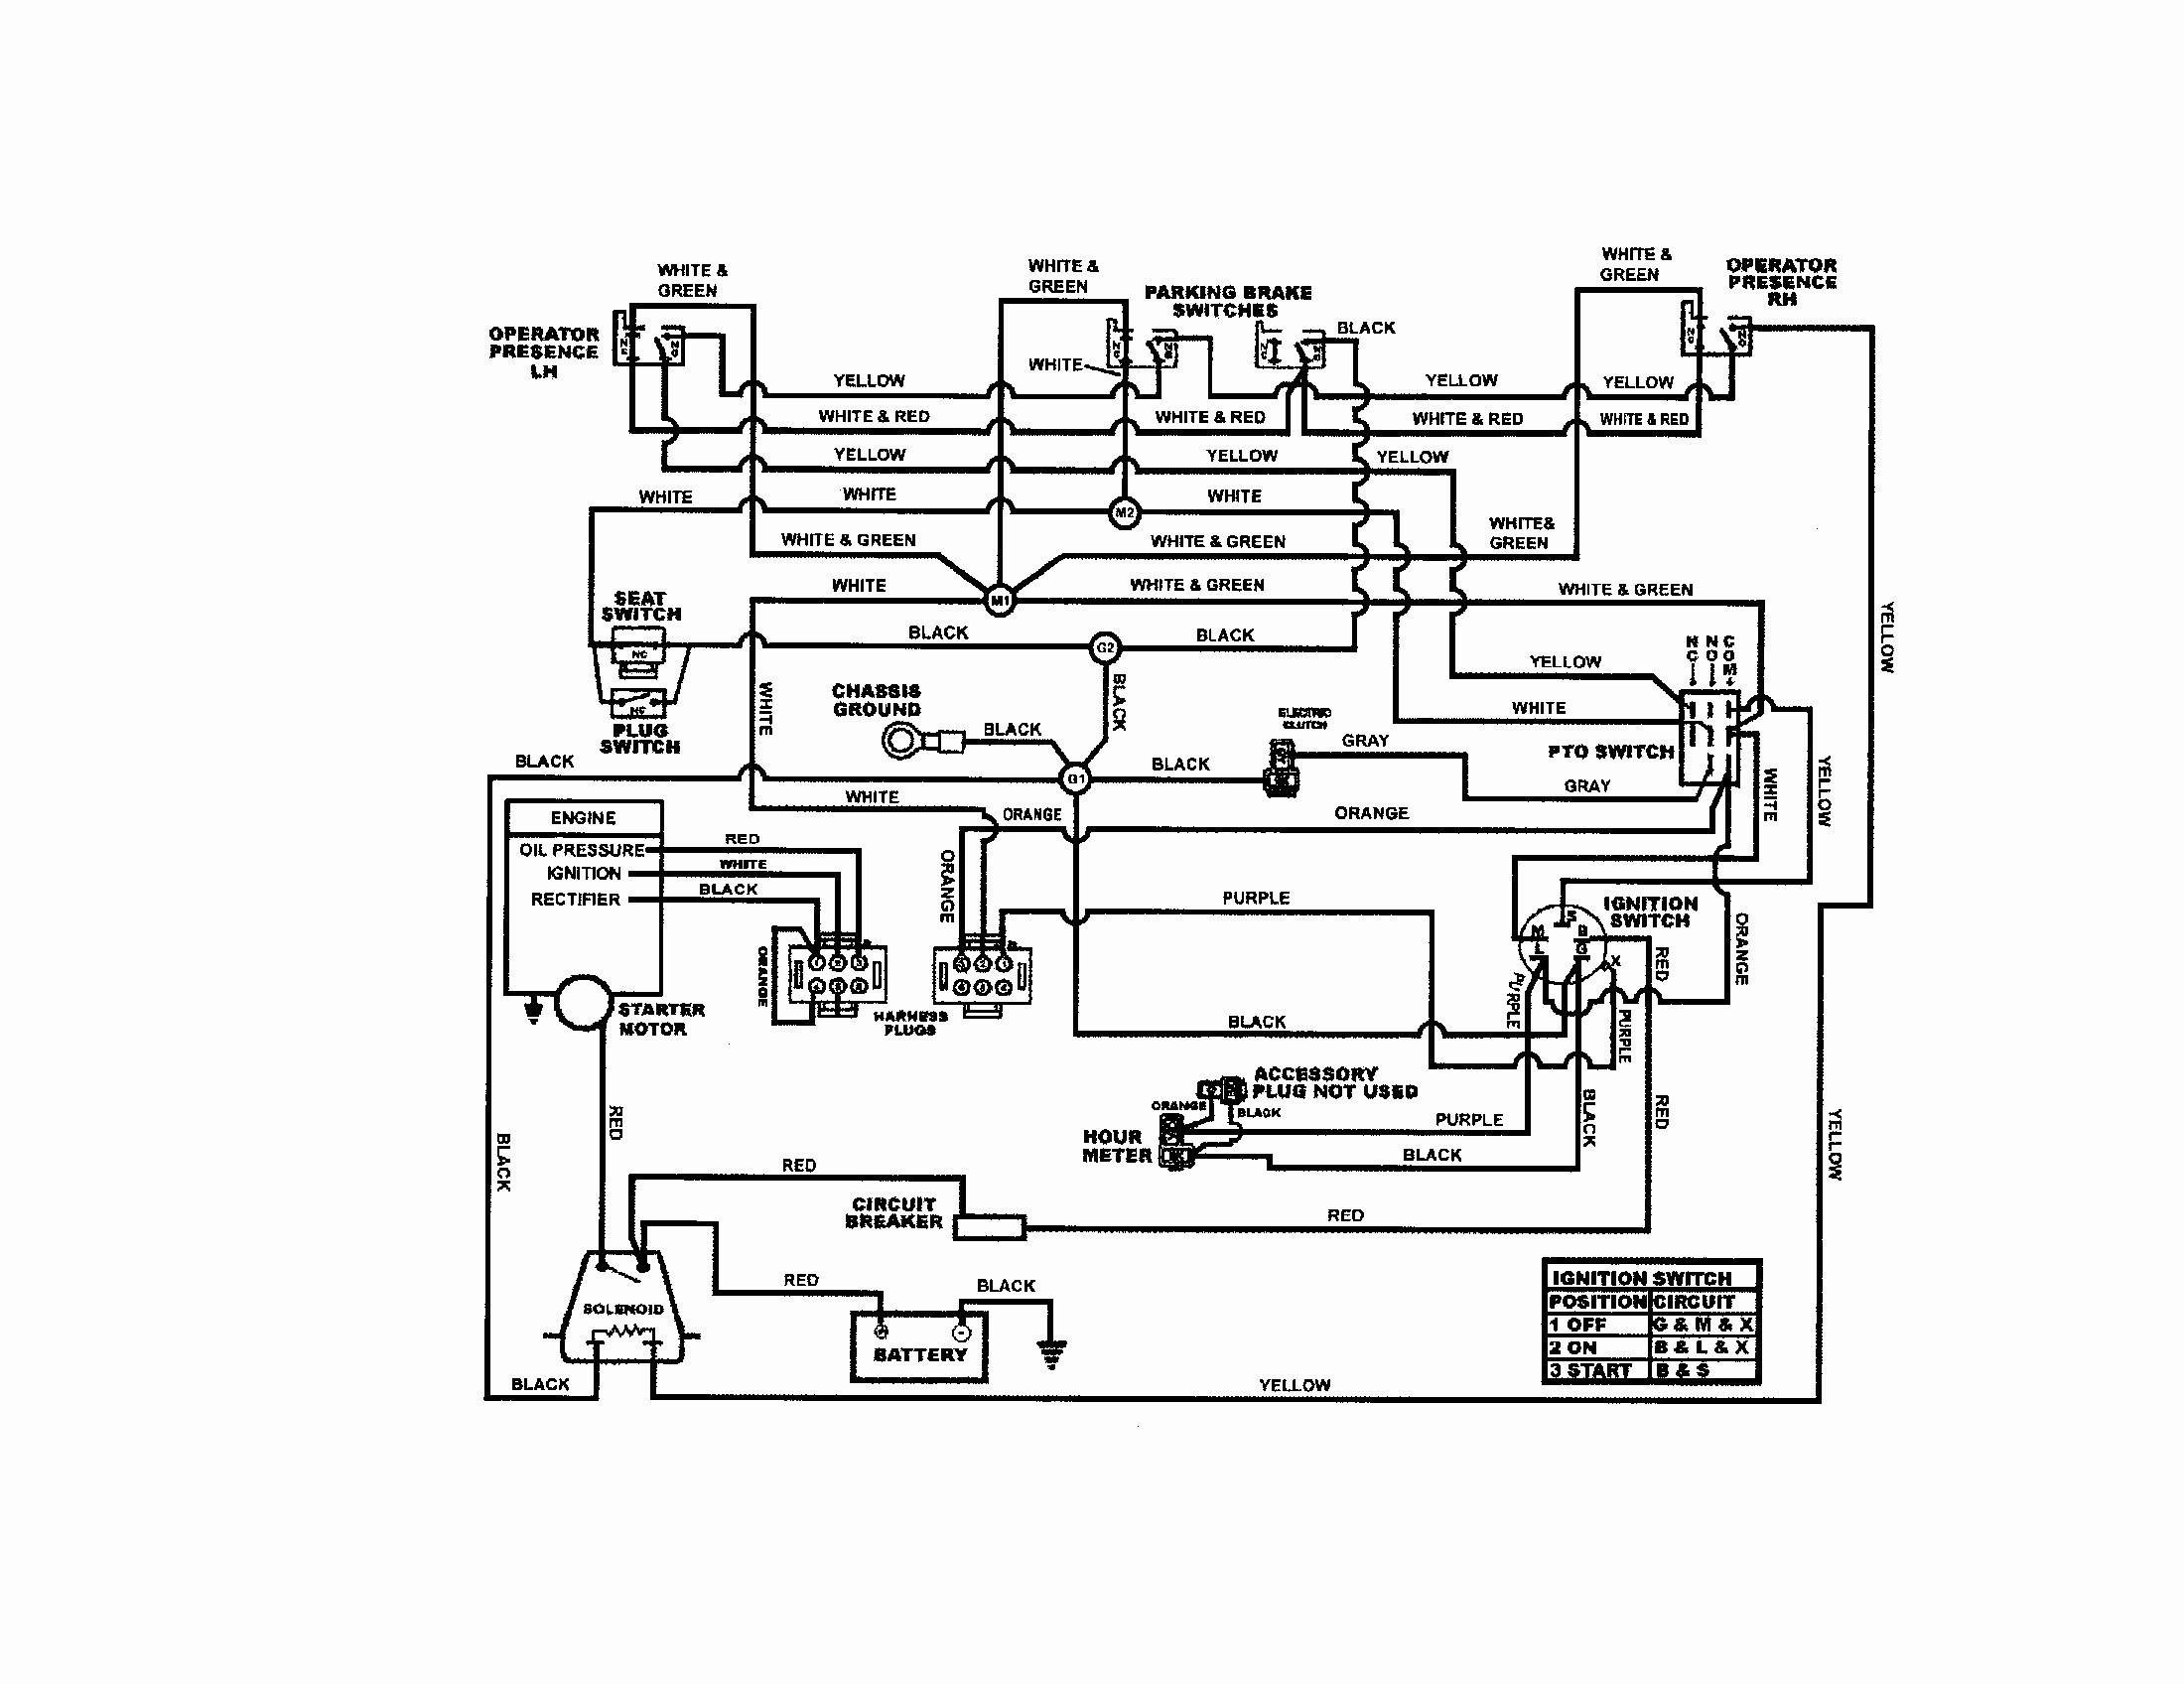 Briggs and Stratton Engine Troubleshooting Diagram Briggs and Stratton Ignition Wiring Wiring Diagram for • Of Briggs and Stratton Engine Troubleshooting Diagram